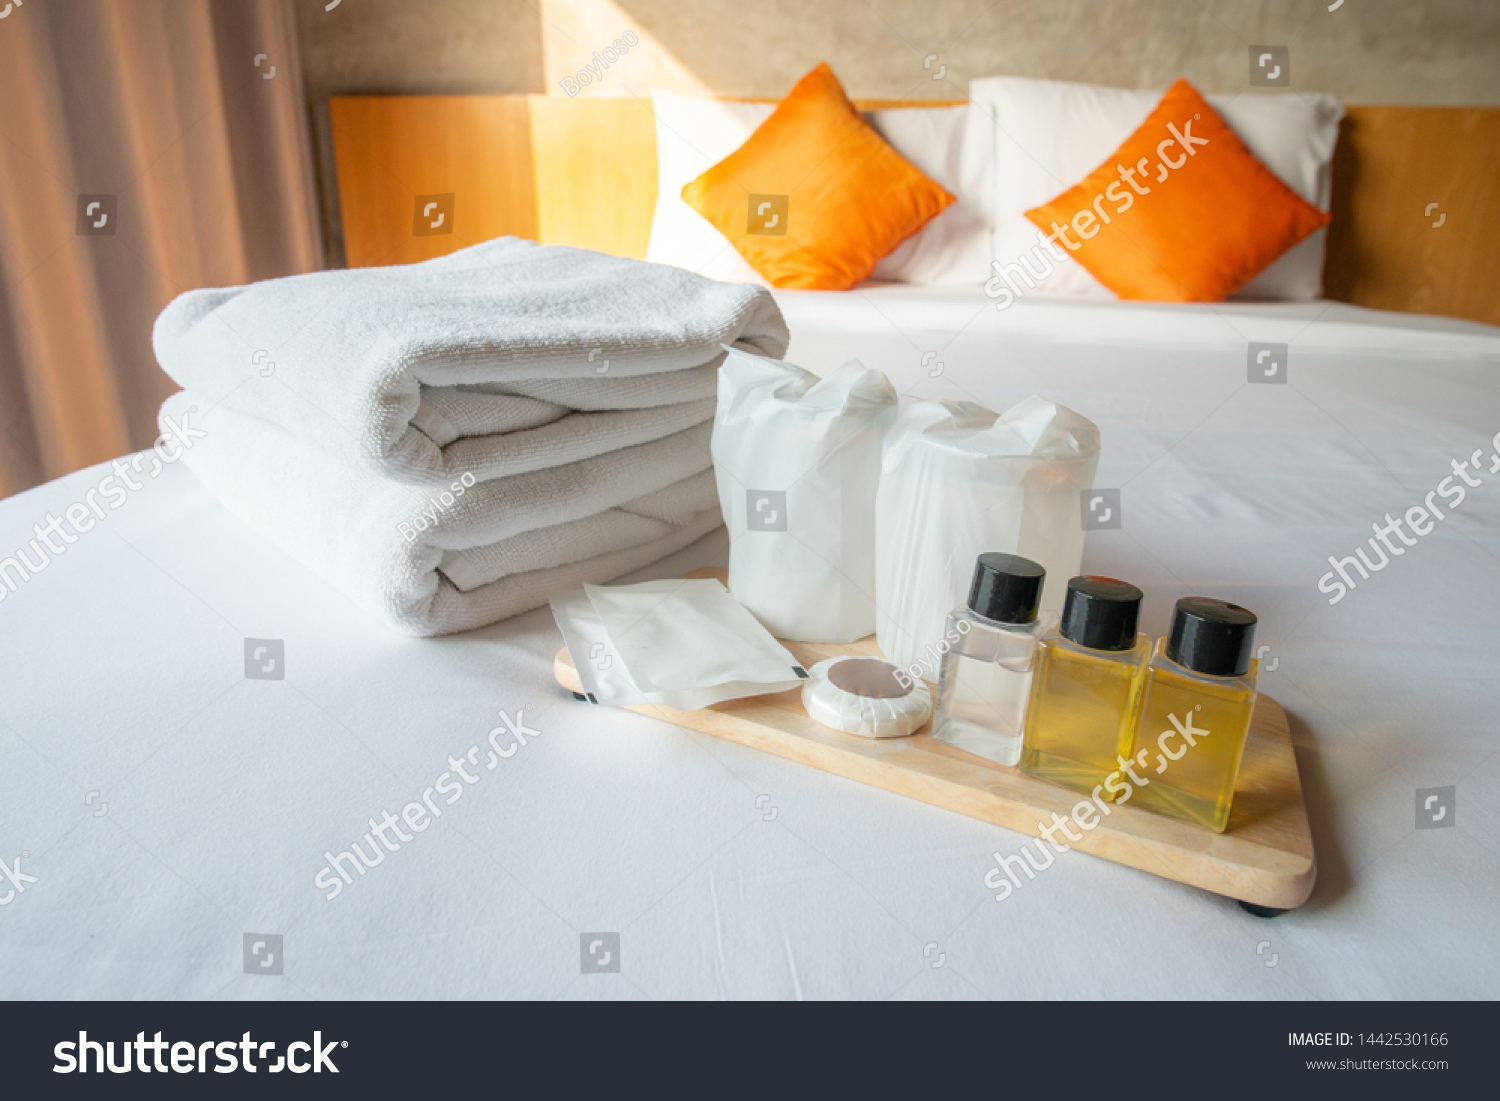 Set of hotel amenities (such as towels, shampoo, soap, drinking glass etc) on the bed. Hotel amenities is something of a premium nature provided in addition to the room when renting a room. #1442530166